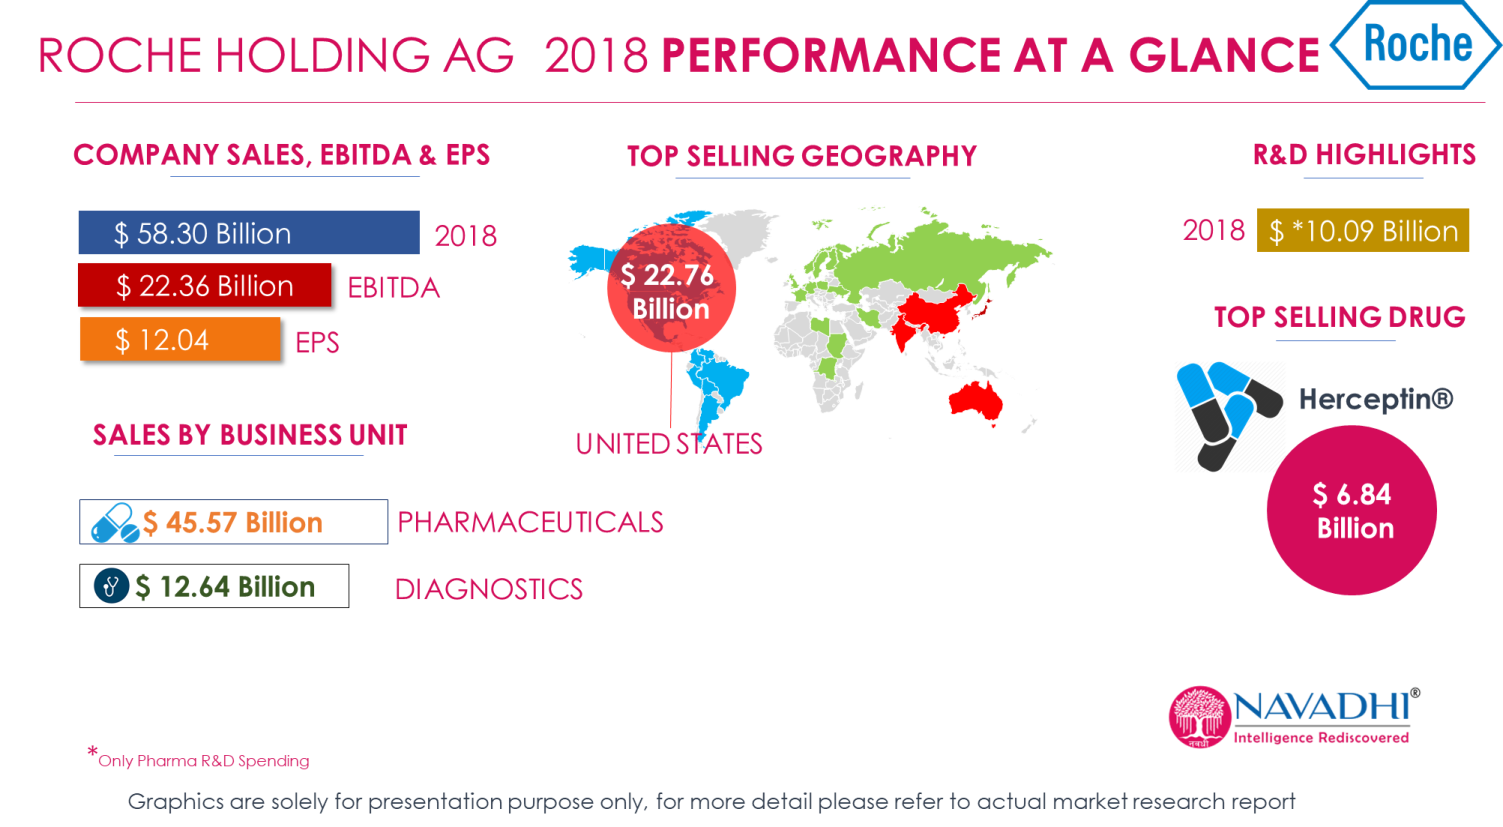 Roche Holding AG 2018 Revenue Performance at a glance